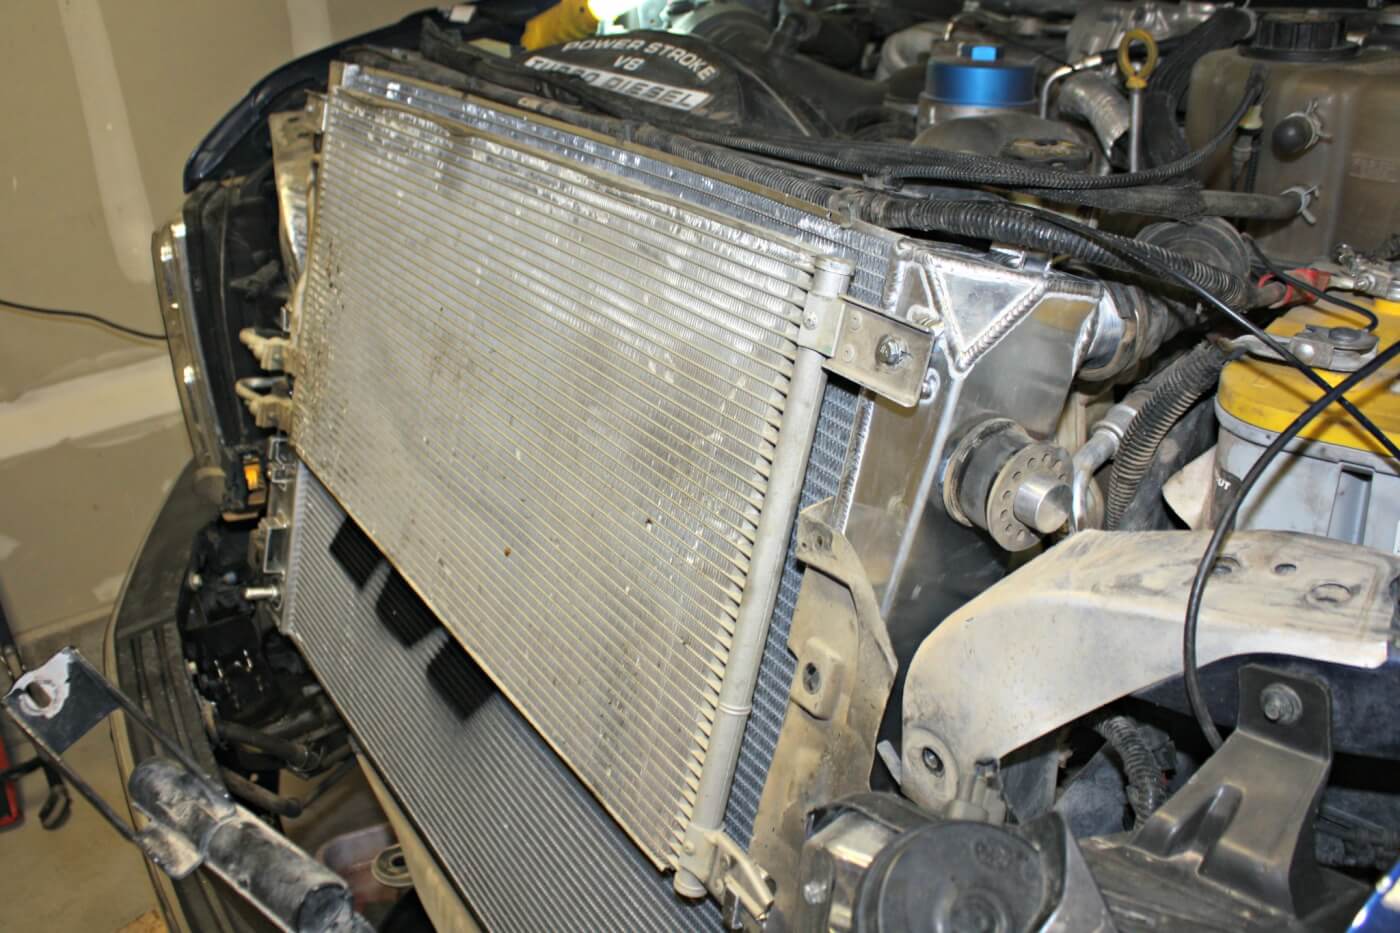 16. With the help of a friend the new radiator can be installed in the truck; reassembly is the reverse of disassembly.